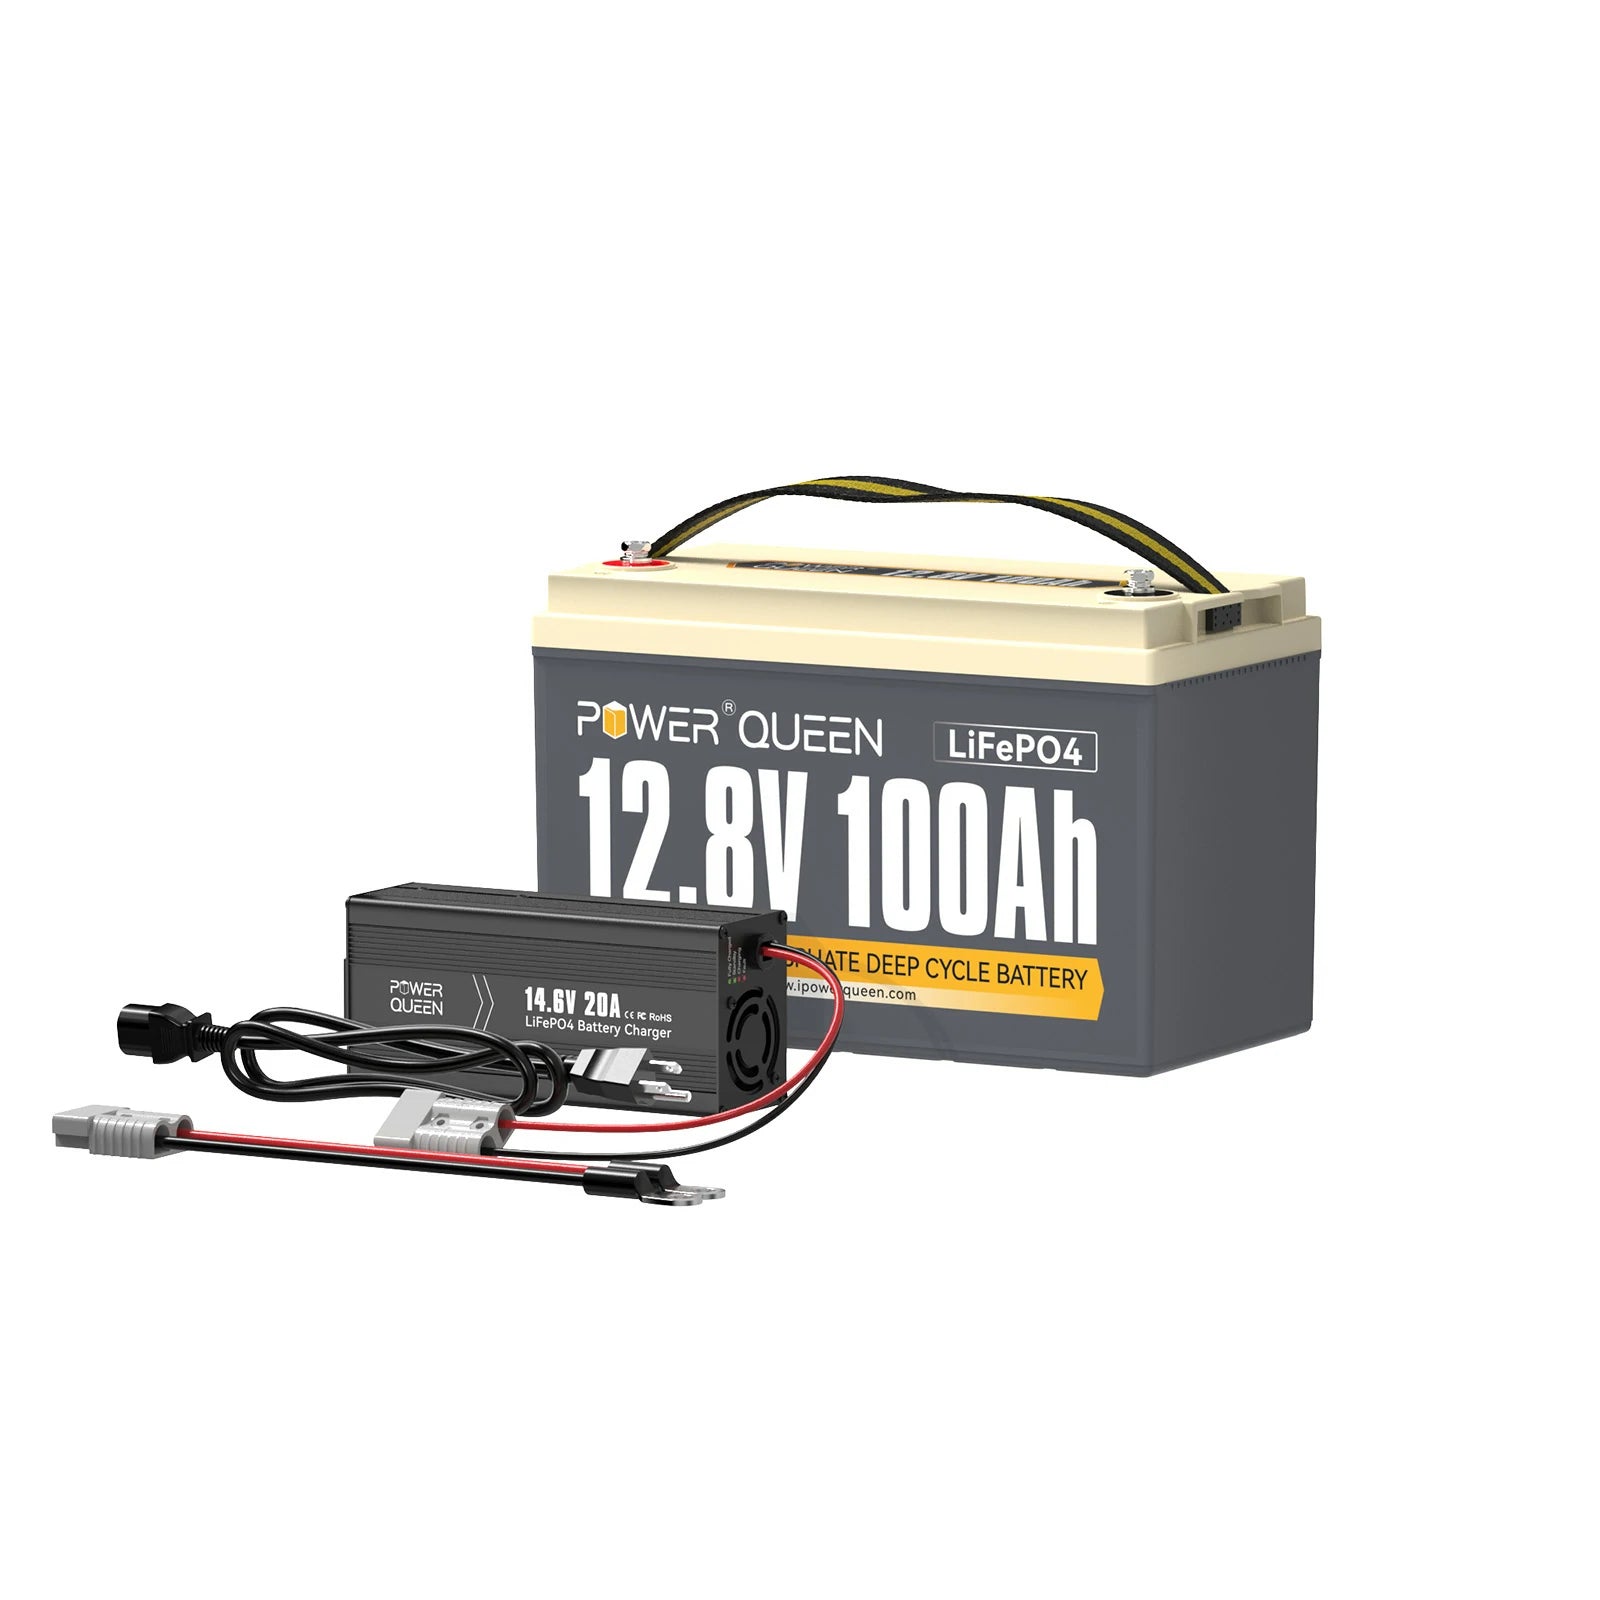 Power Queen 12V 100Ah LiFePO4 Battery + 14.6V 20A Charger